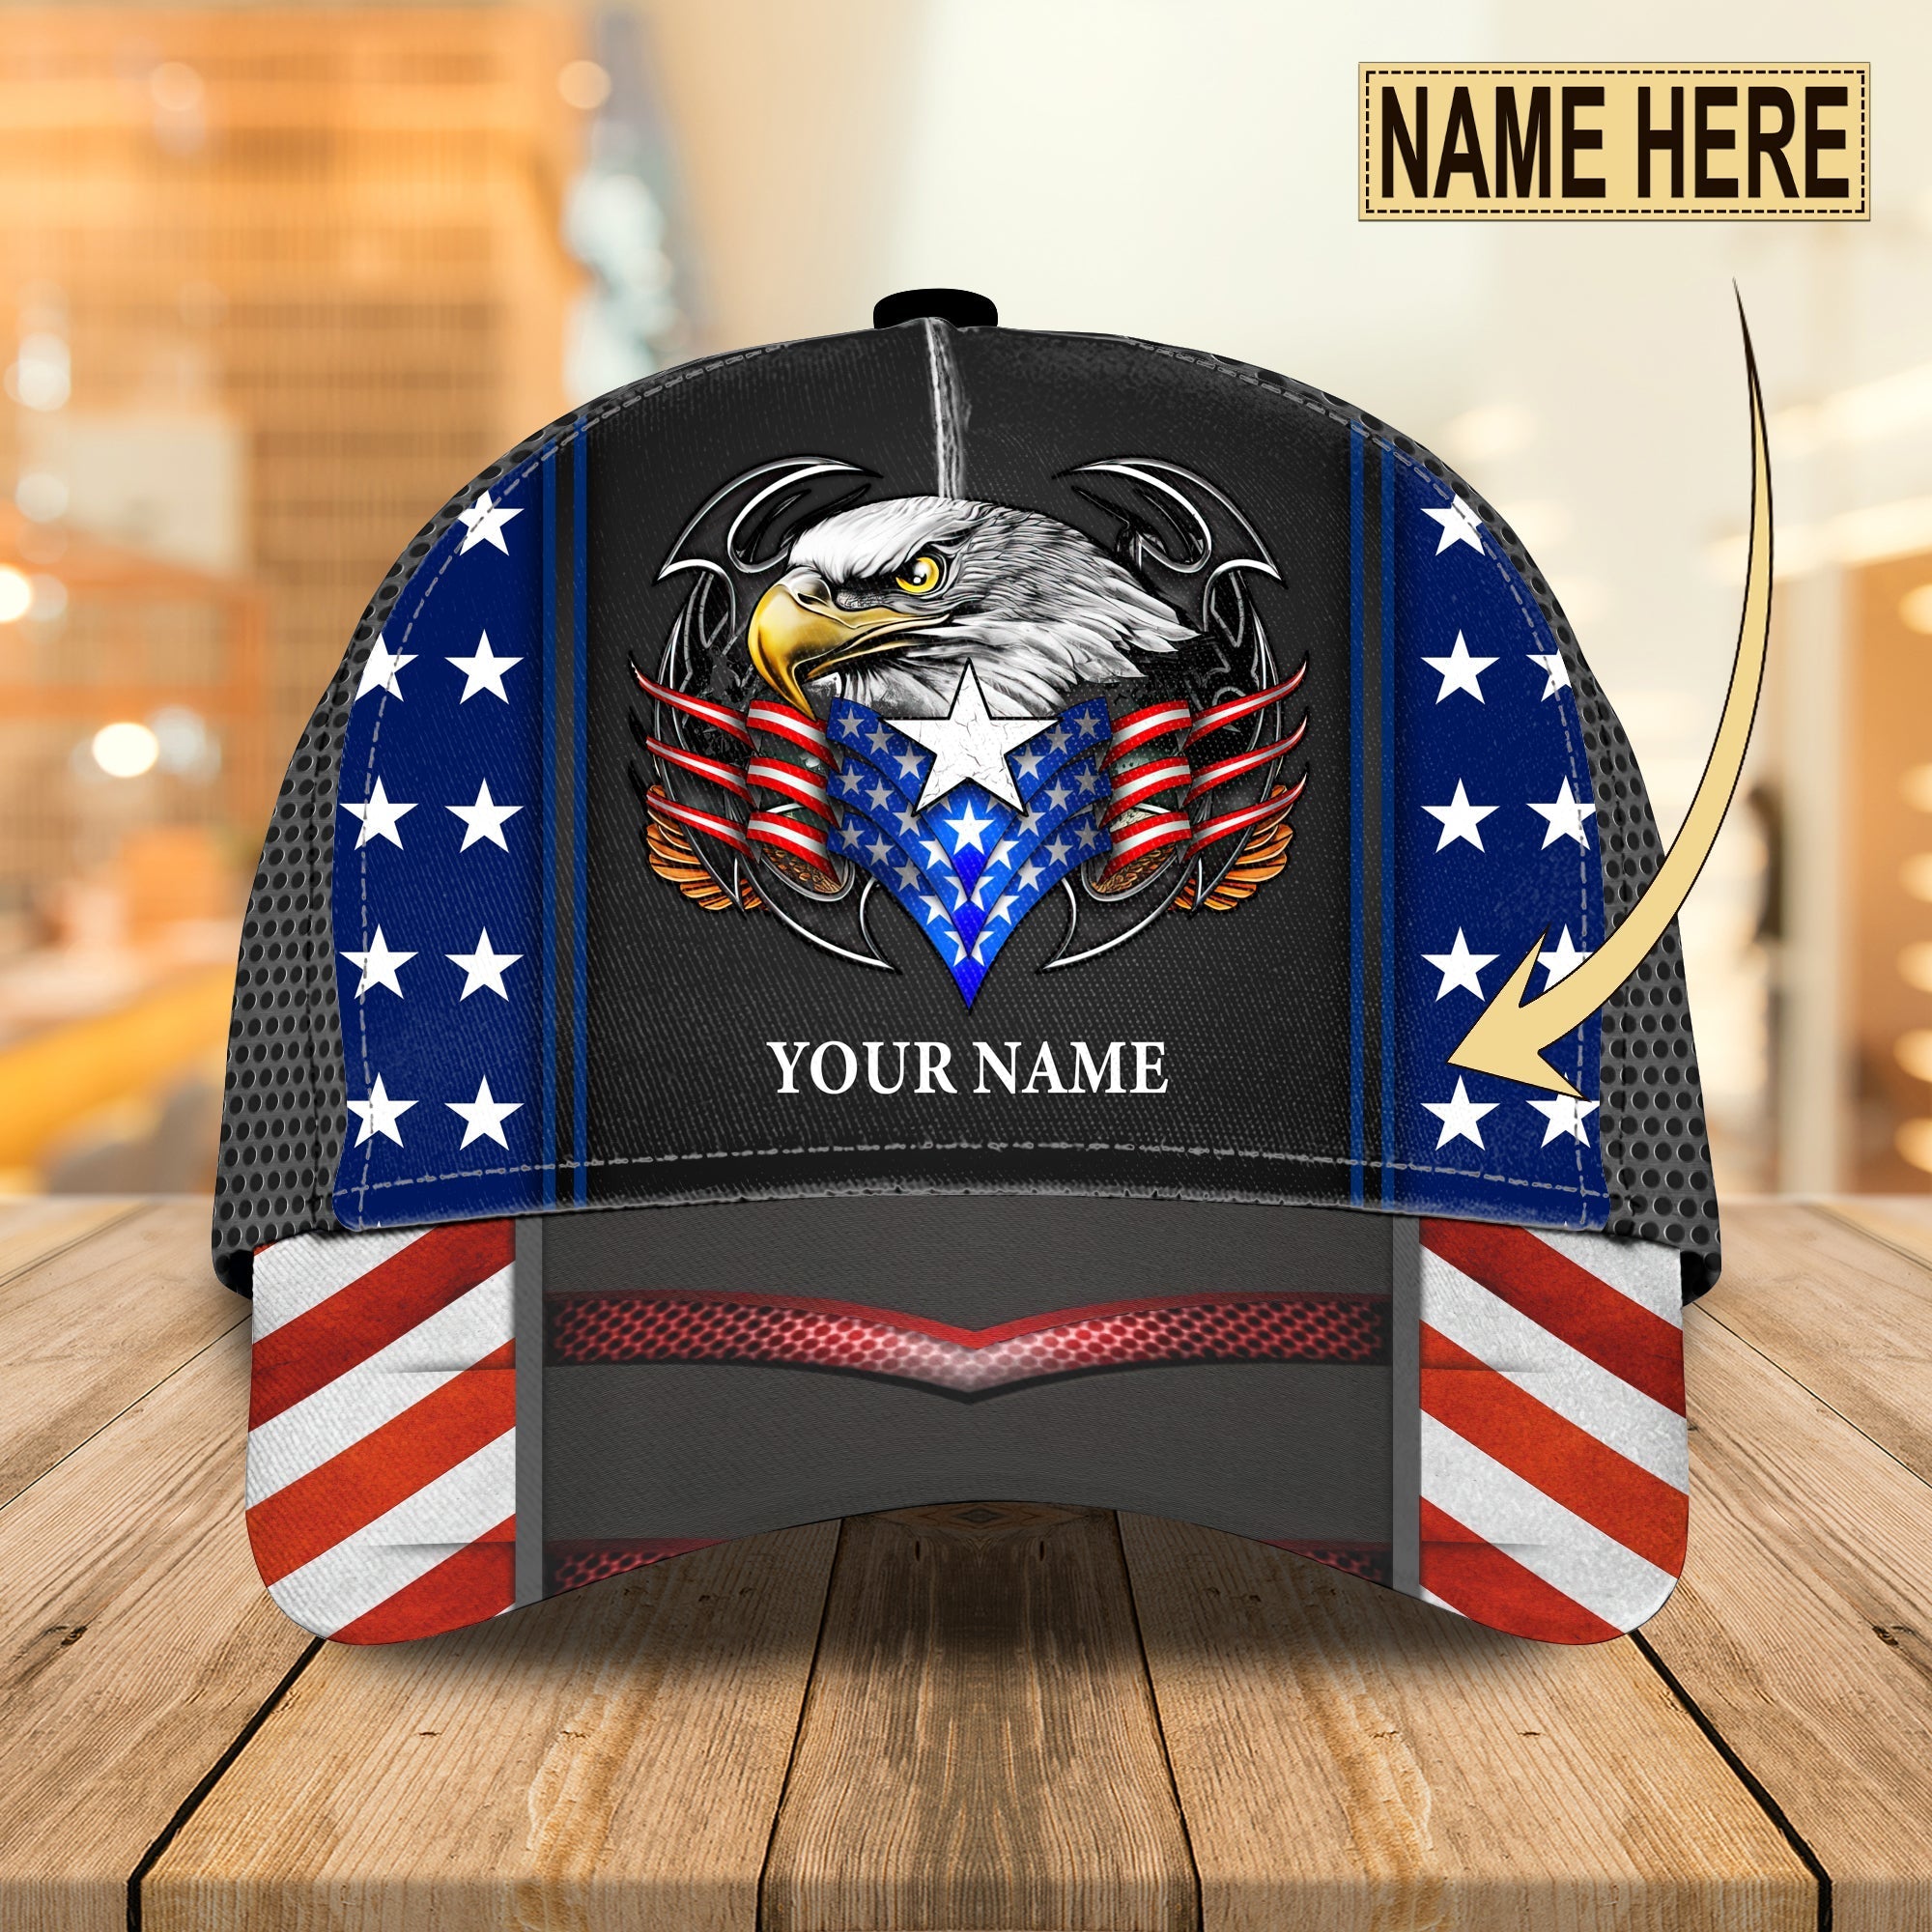 Customized With Name 3D Full Printed Patriotic Cap Hat/ Eagle American Flag Baseball Cap Hat/ Independence Day Cap Hat